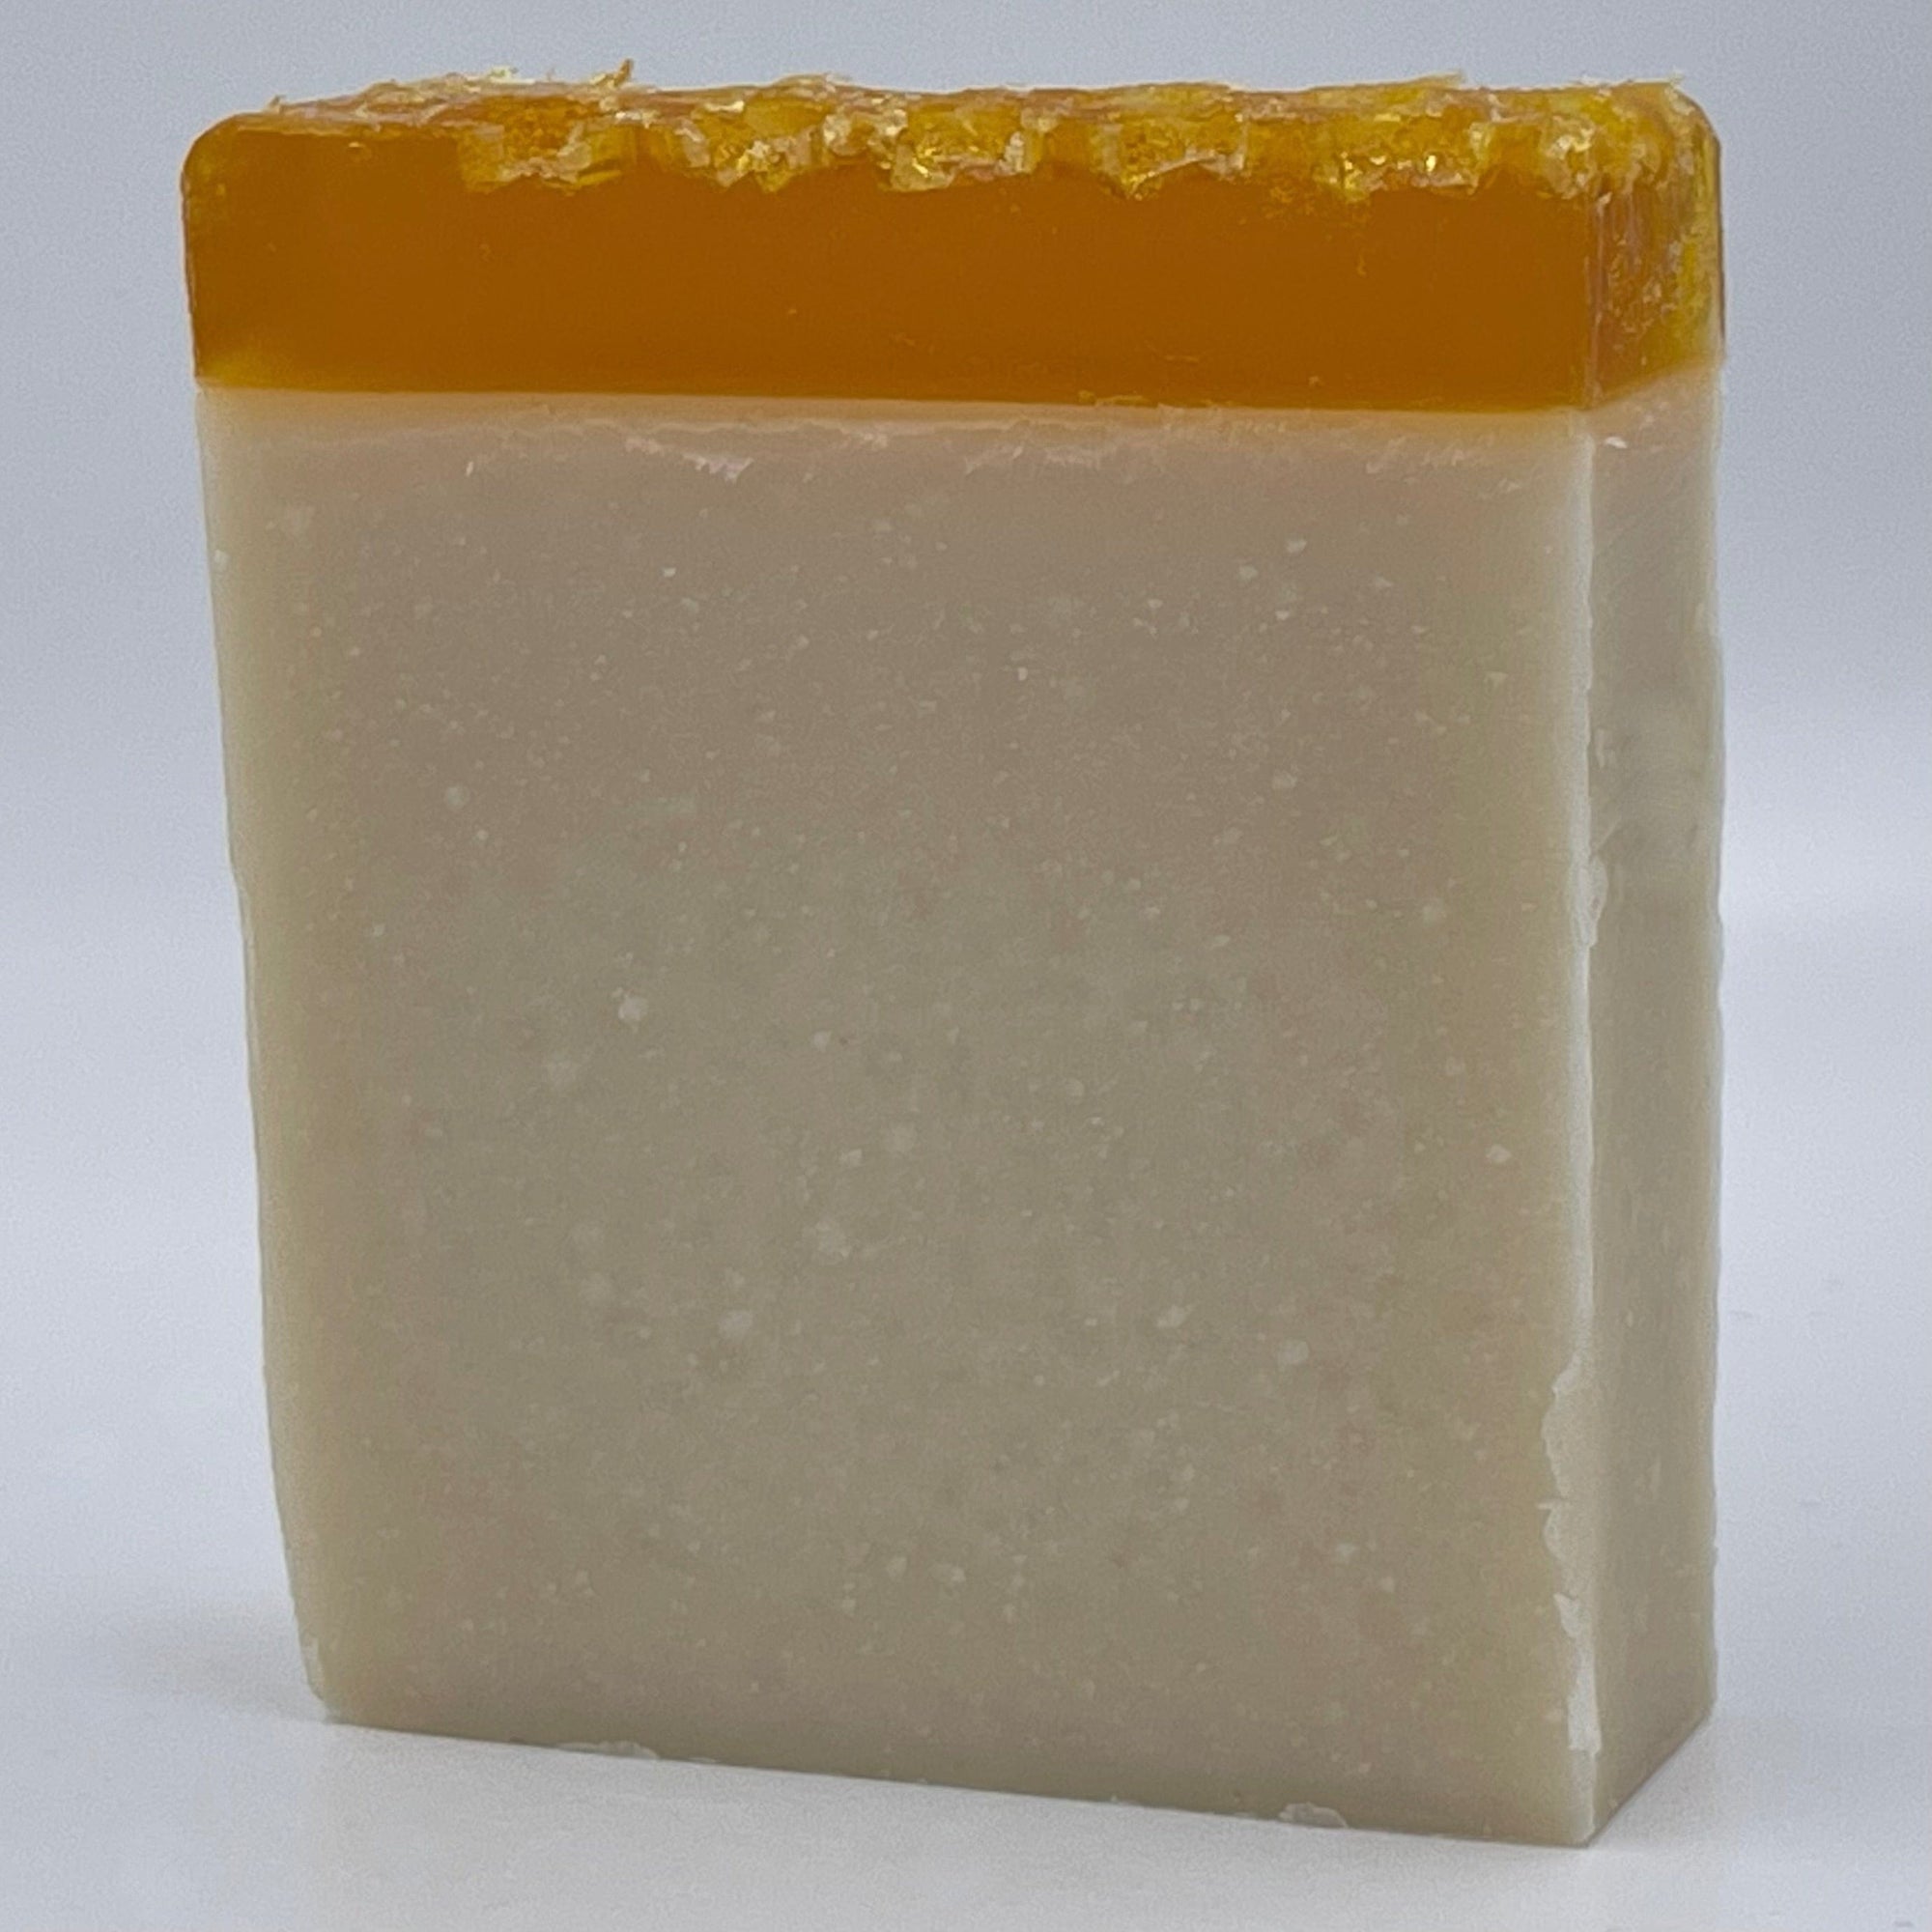 Honey Almond Bar Soap 5oz- Organic Handmade Vegan Soap Bar With All Na –  Scents for the Soul Candle Company, LLC ™